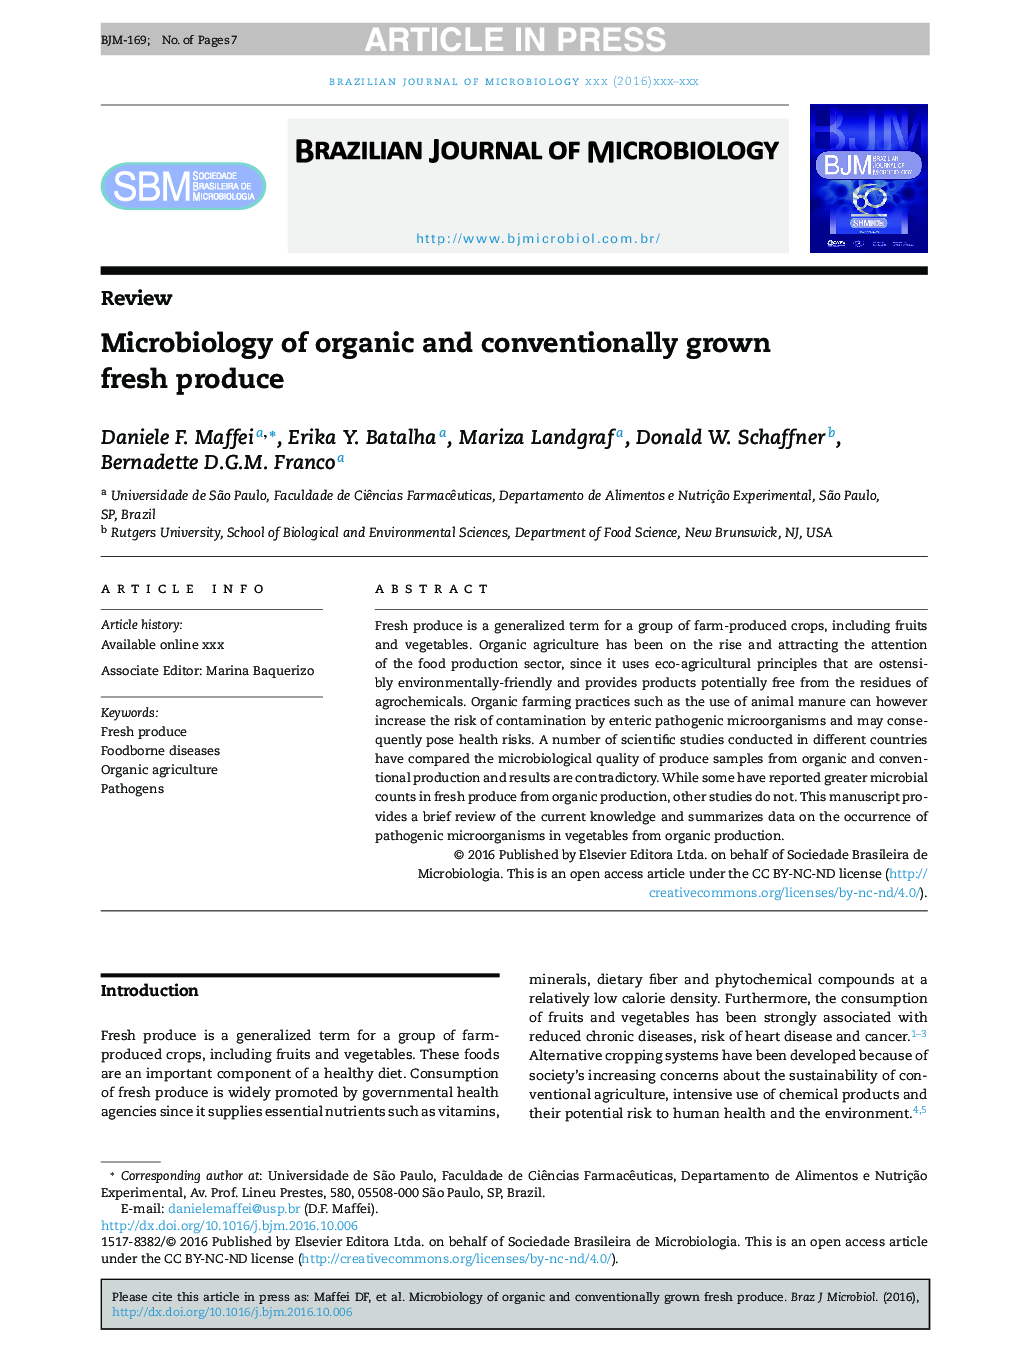 Microbiology of organic and conventionally grown fresh produce